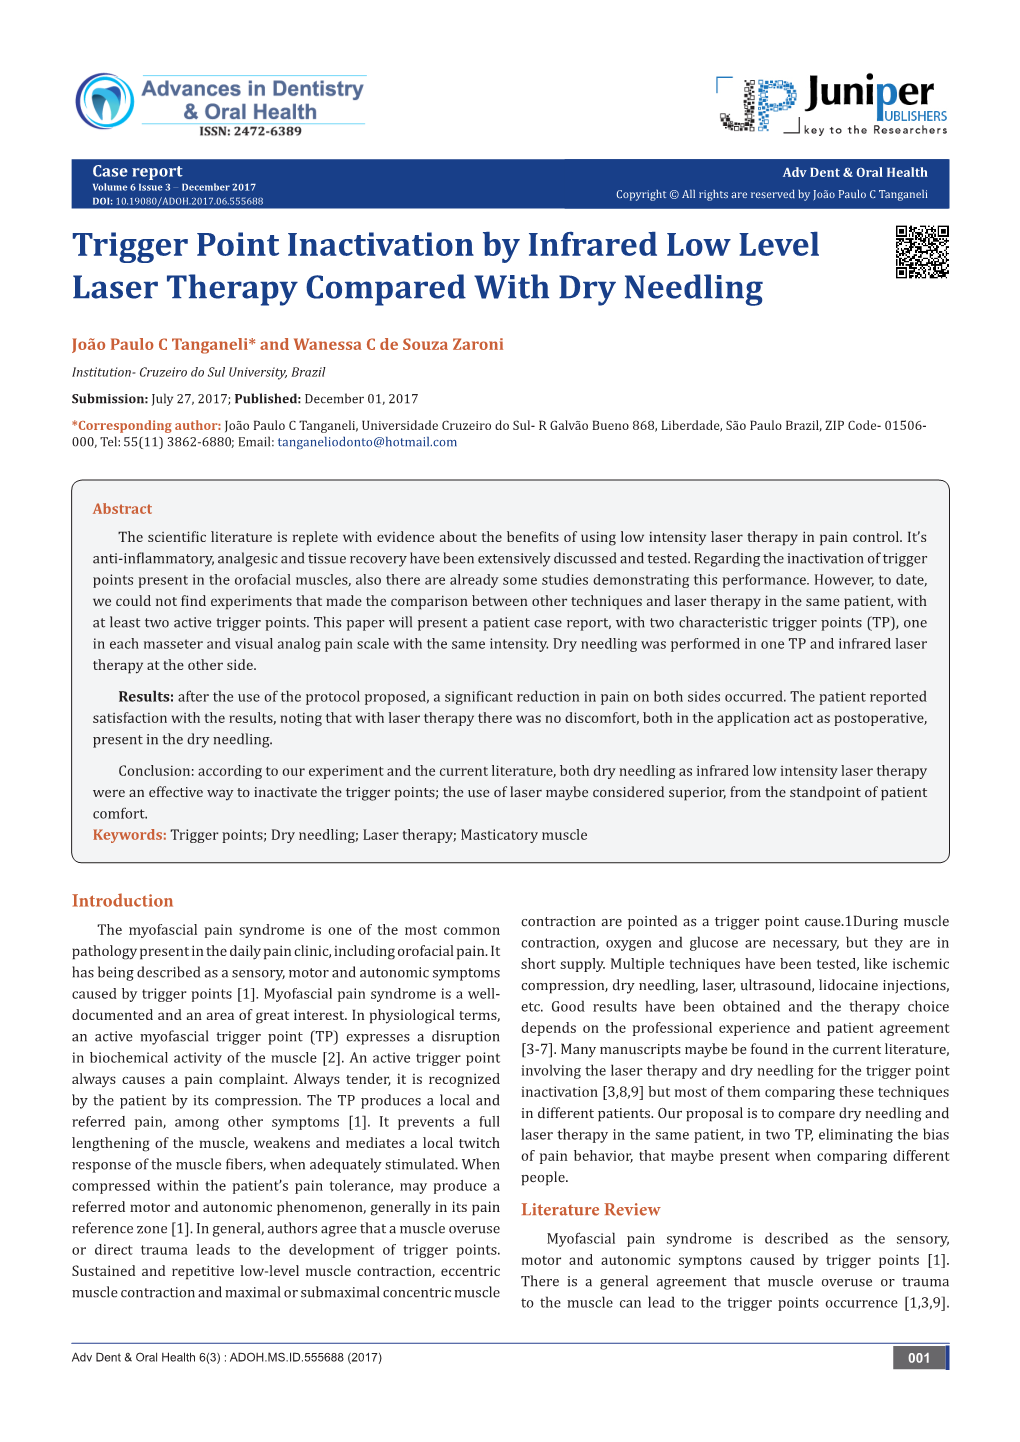 Trigger Point Inactivation by Infrared Low Level Laser Therapy Compared with Dry Needling